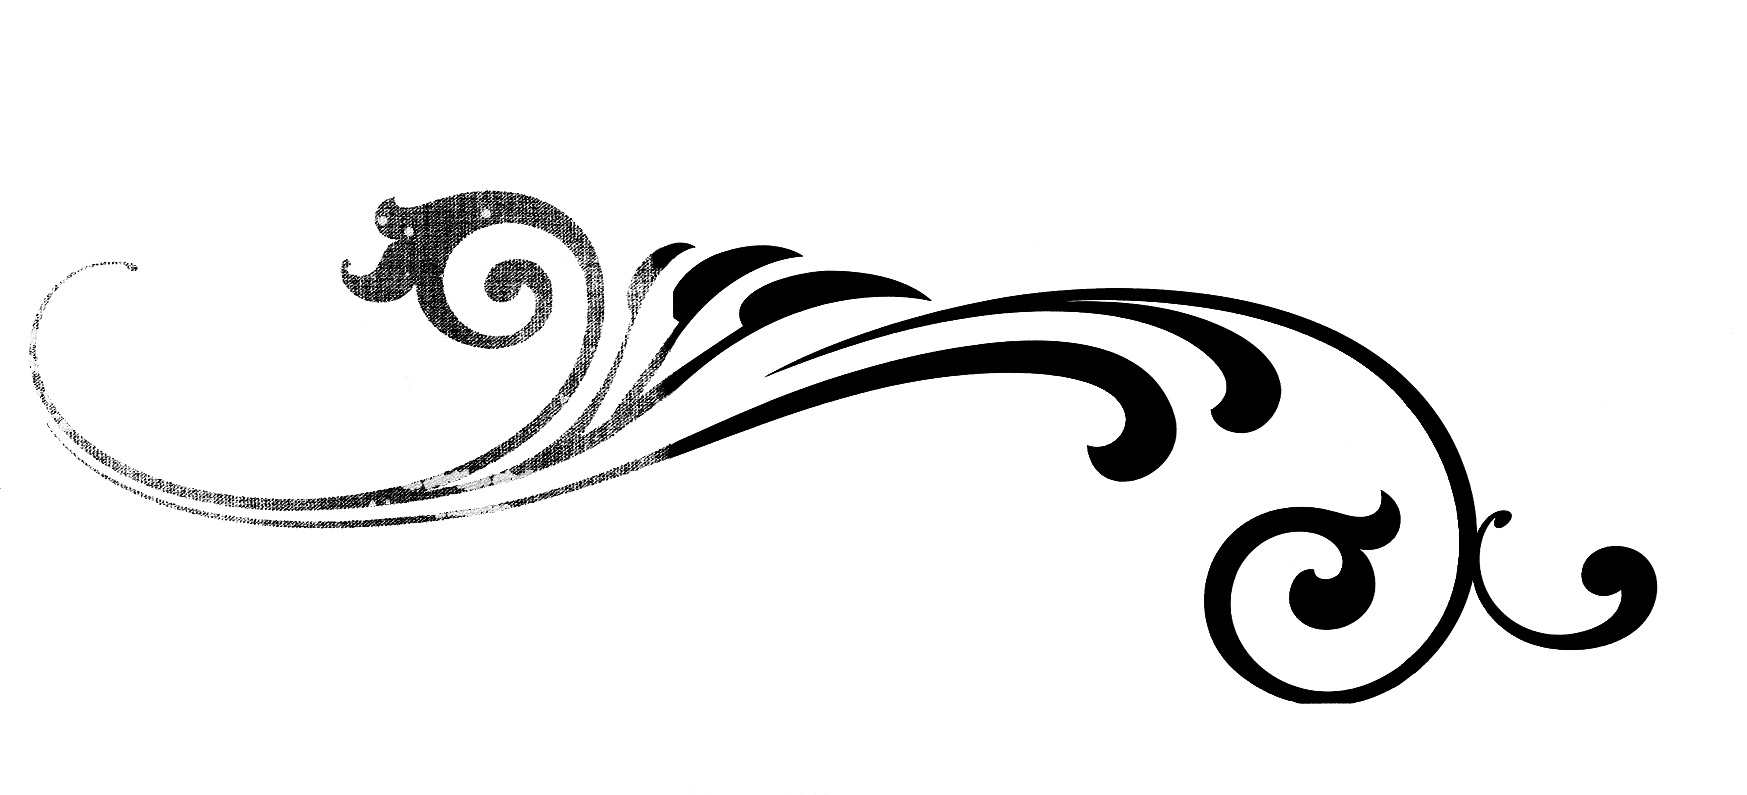 21 Fancy Flourish Free Cliparts That You Can Download To You Computer